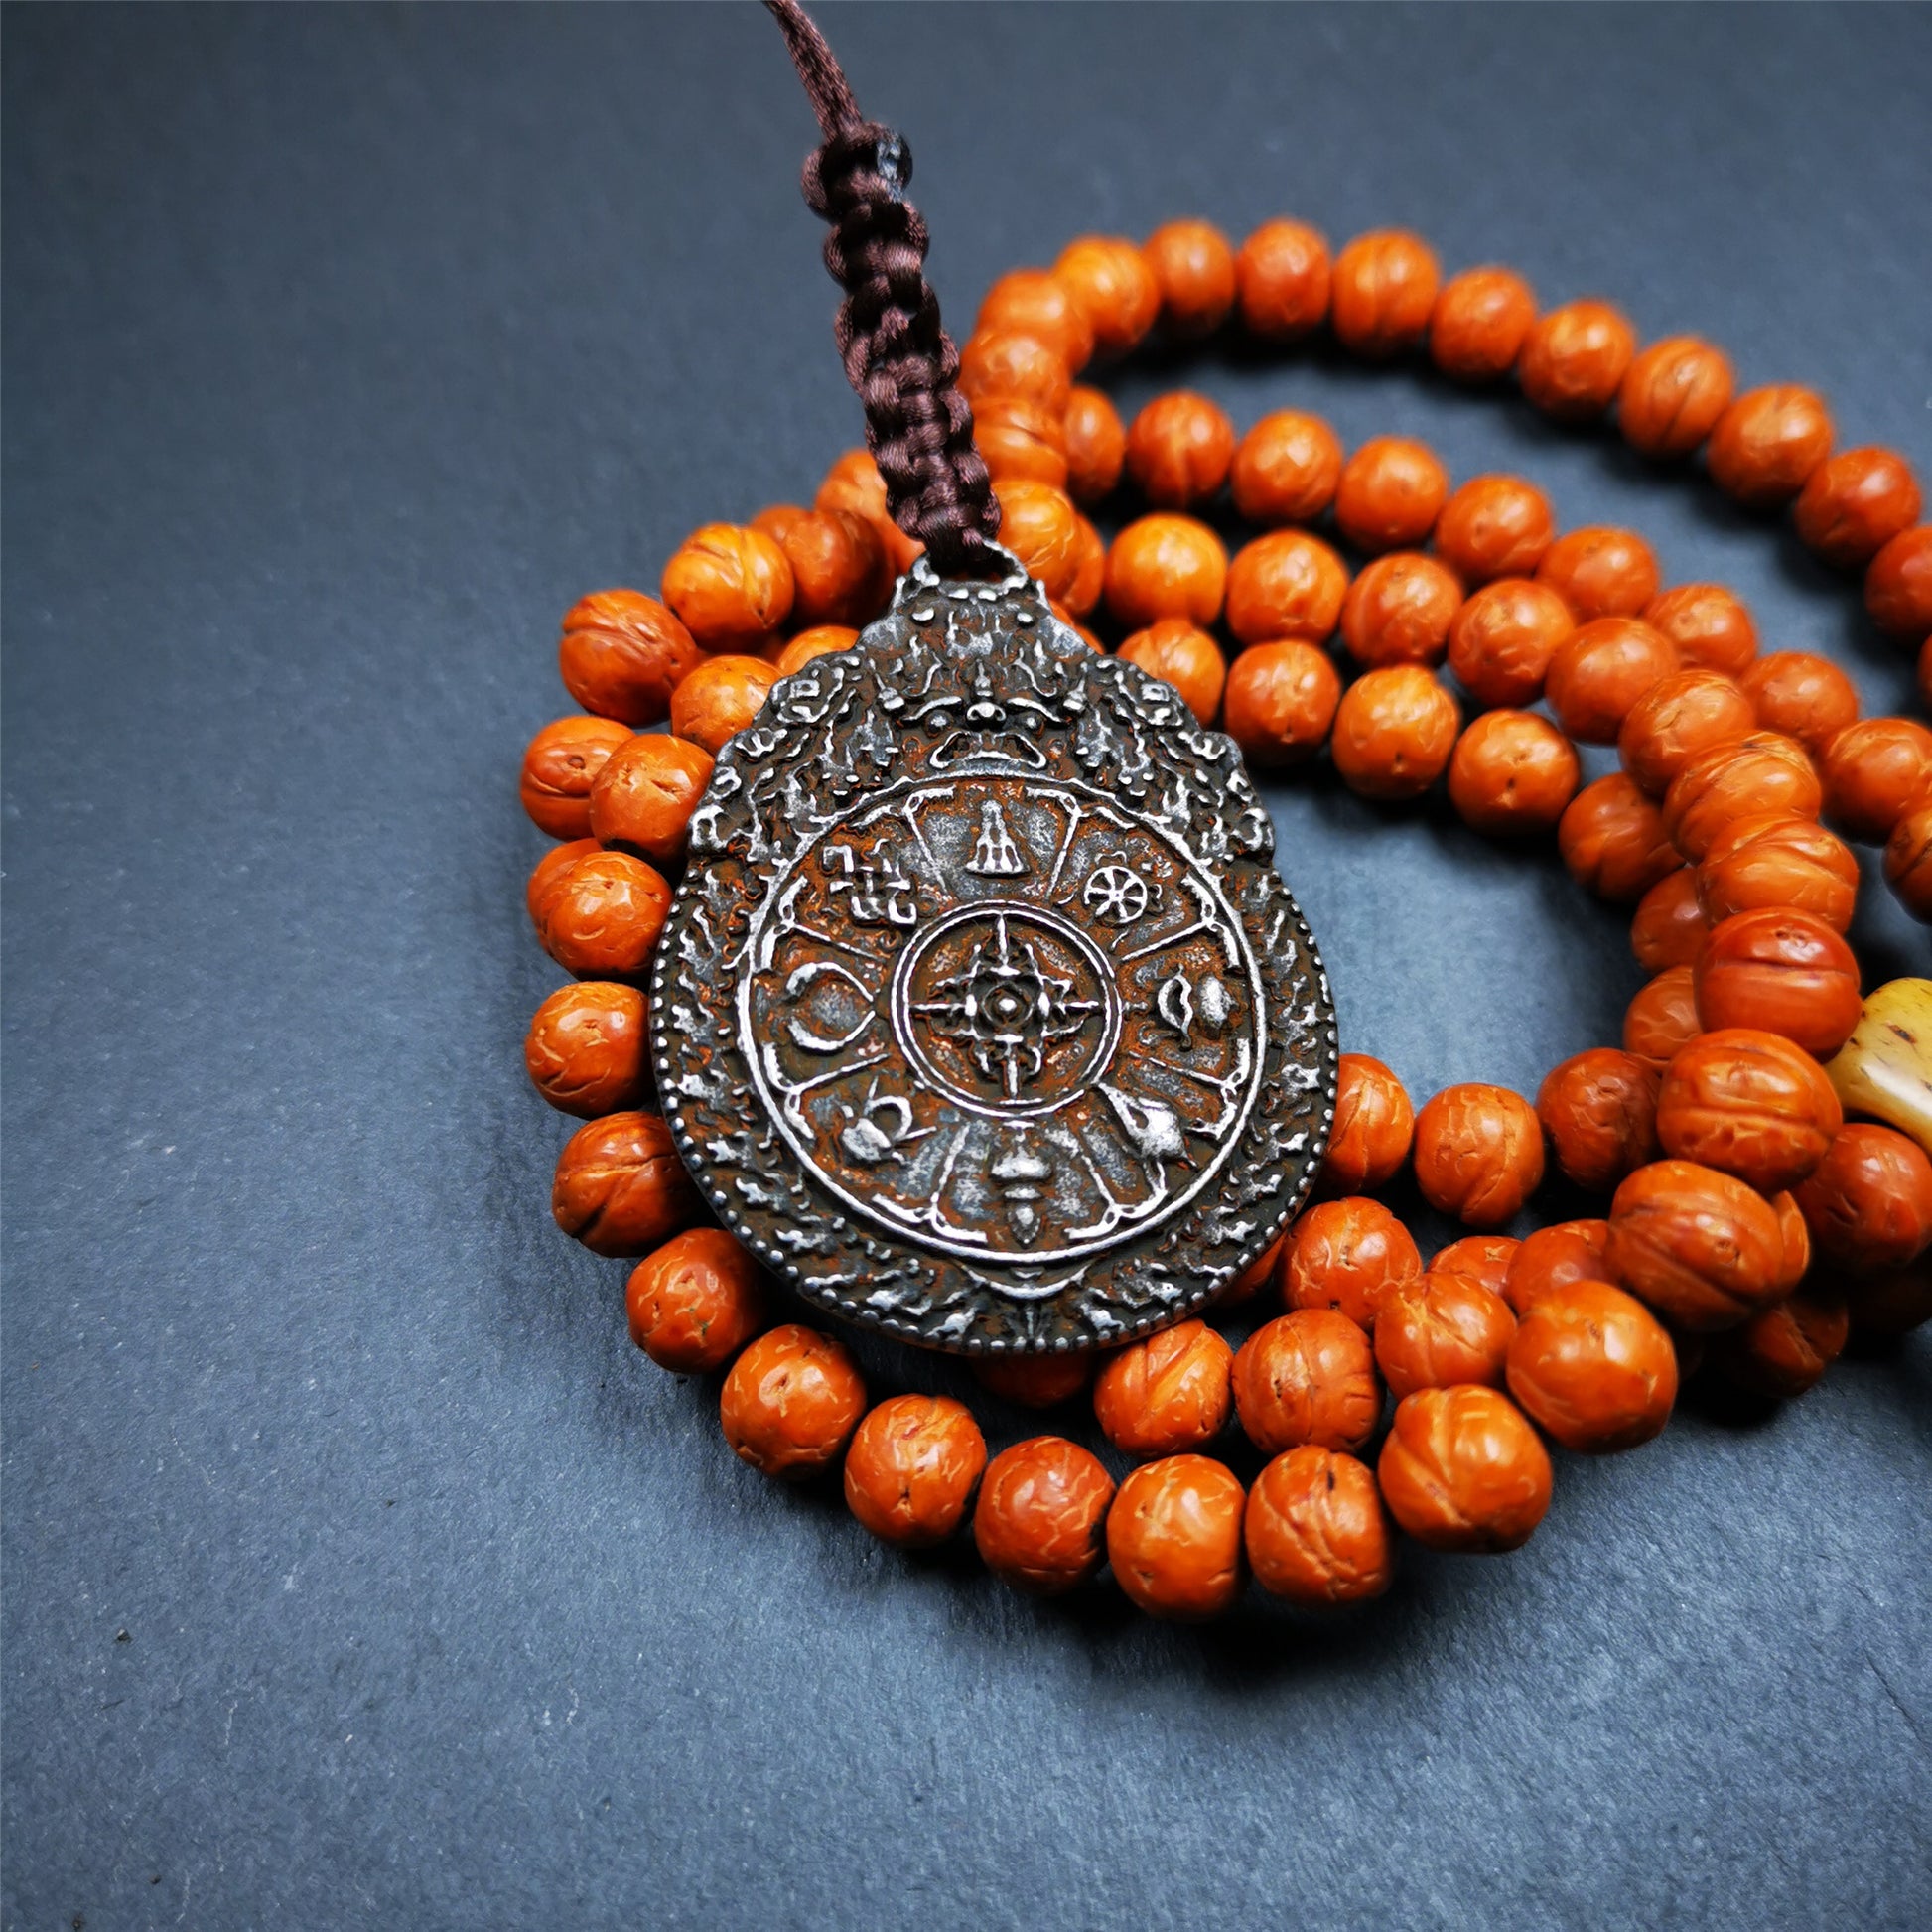 This unique melong badge was collected from Rejia Monastery,it was sacred amulets used present to believers,during a grand Dharma gathering,consecrated and blessed by lama. It is made of cold iron and 2 sided patterns.The front is Tibetan Budhist amulet symbol - SIPAHO,the back is cross vajra pattern and Ashtamangala